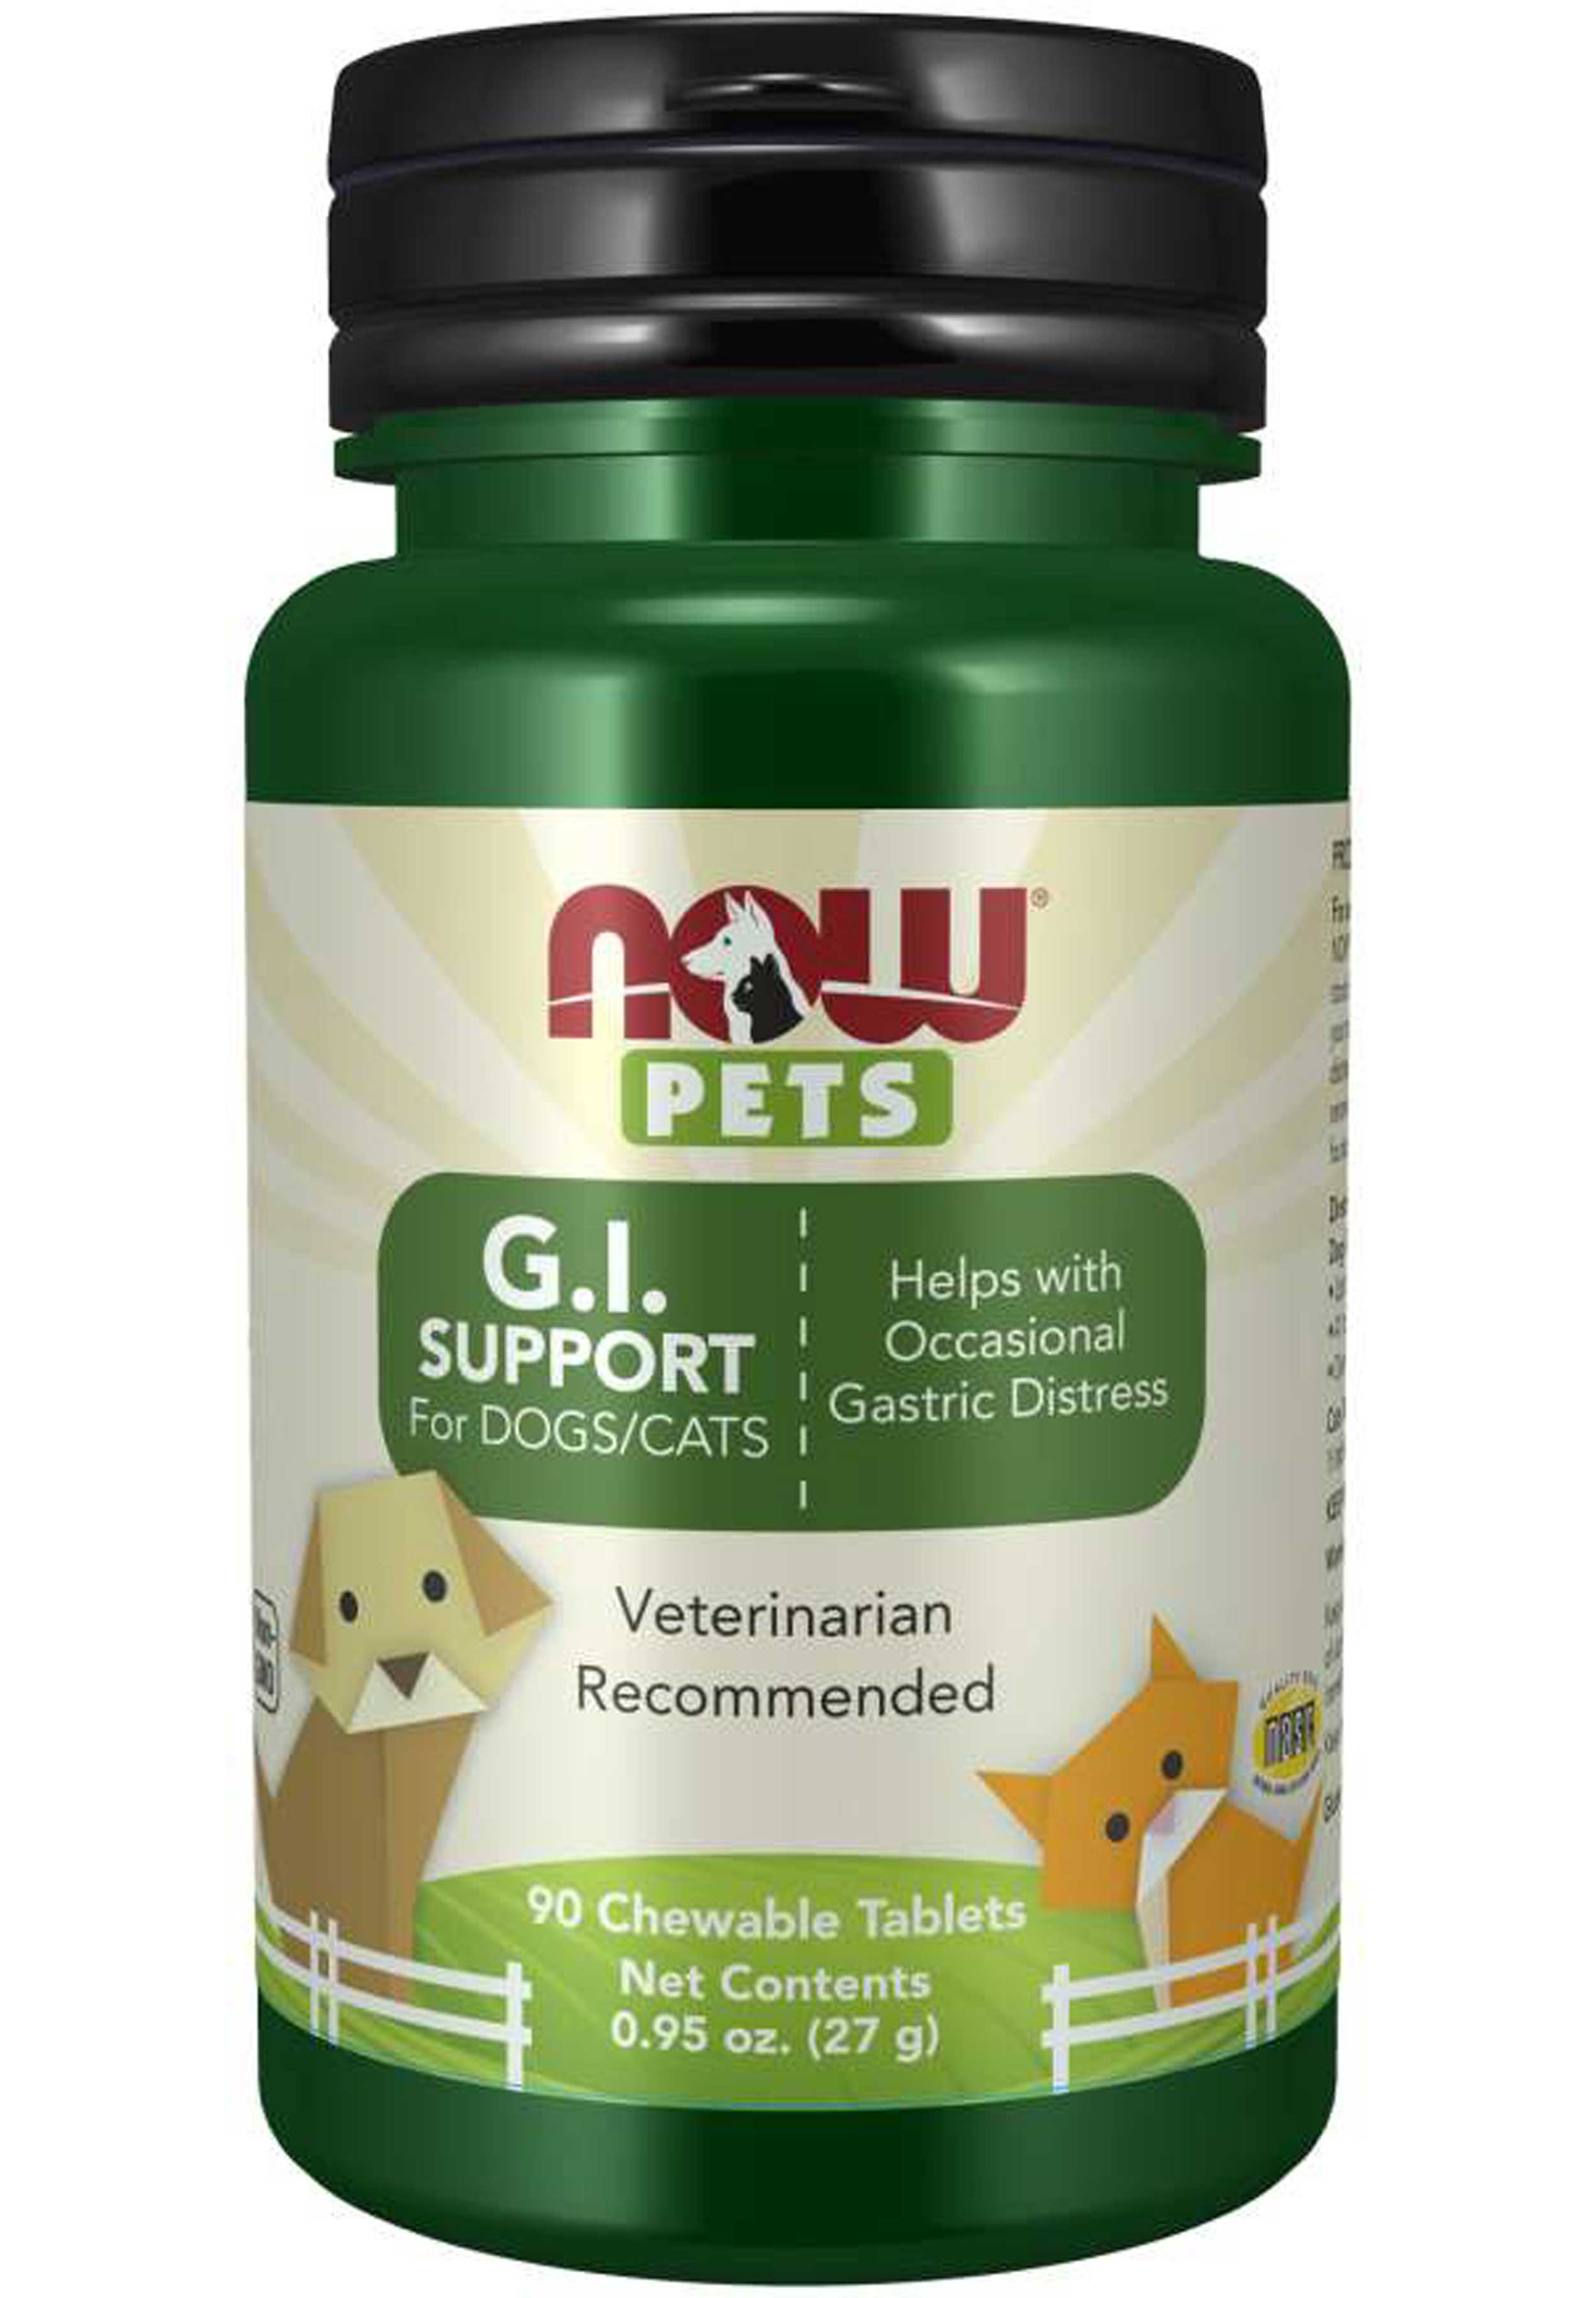 NOW Pets GI Support for Dogs/Cats